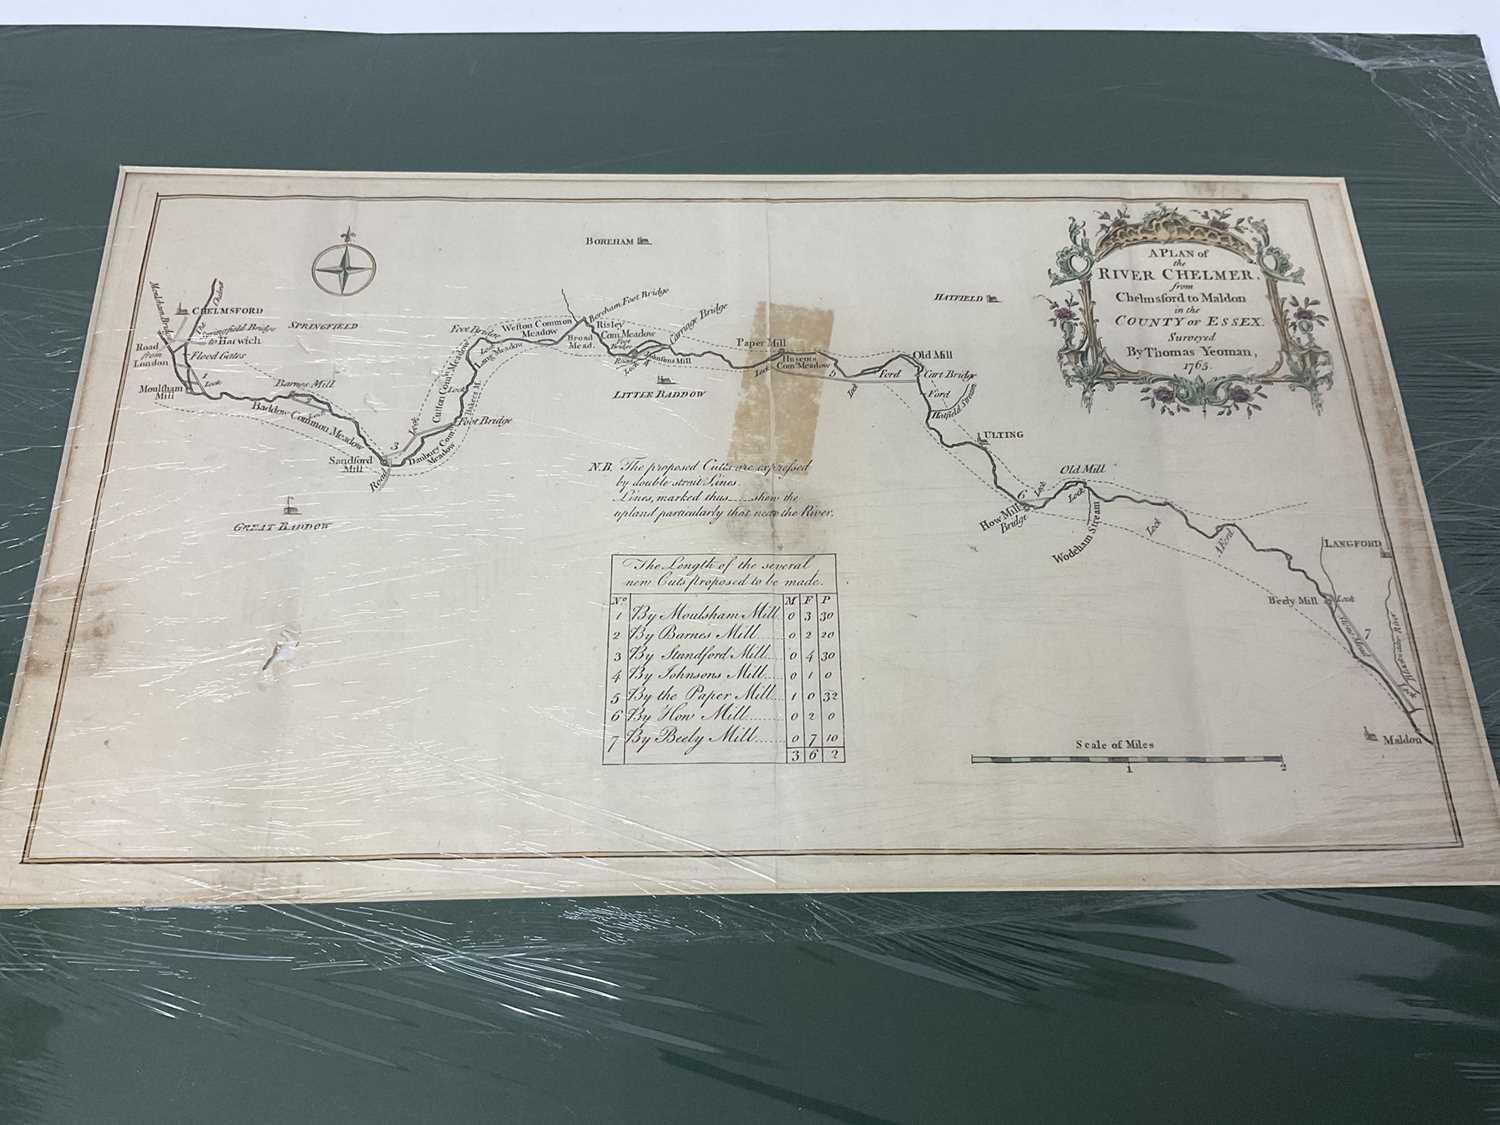 London to Harwich road map and other local interest maps and engravings - Image 4 of 9